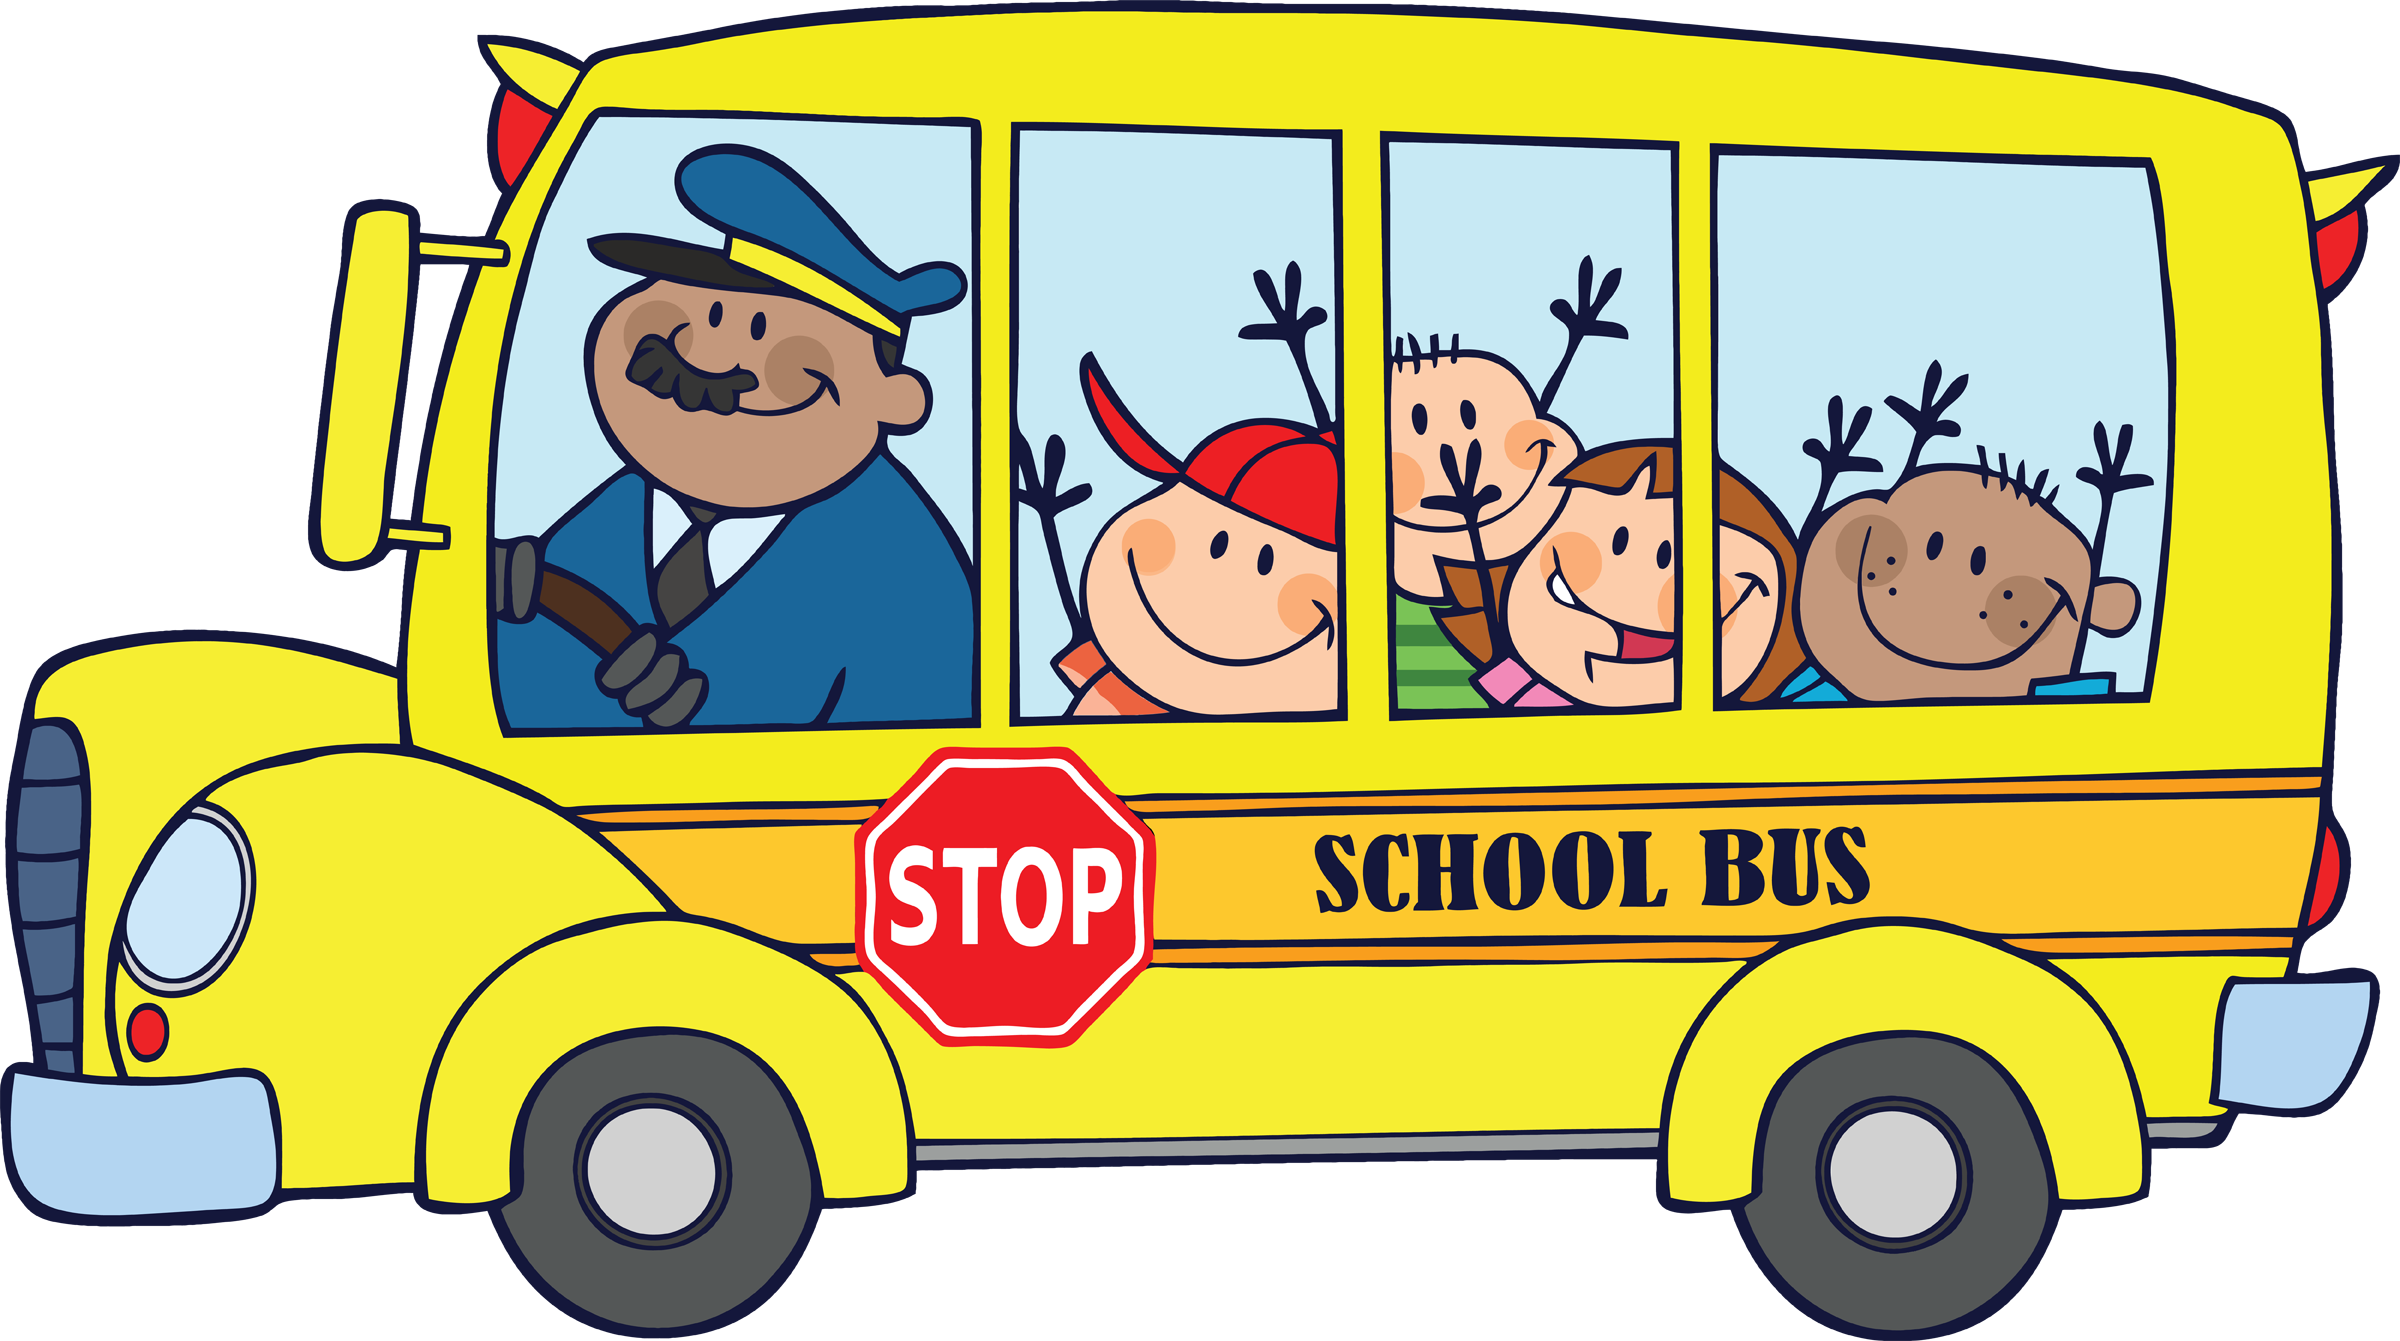 Hill clipart yard. School bus driver quotes